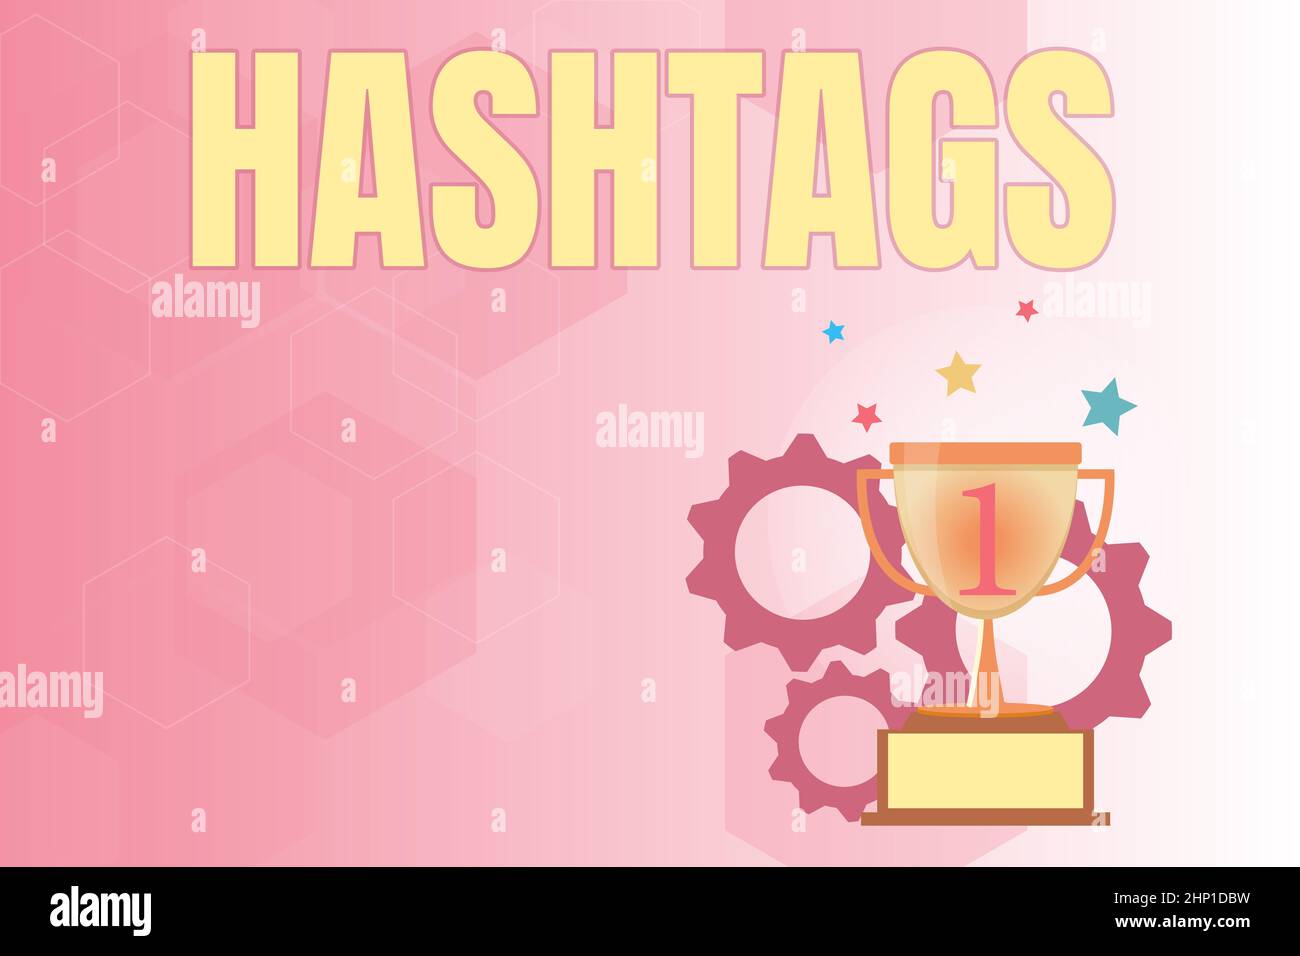 Inspiration showing sign Hashtags, Business overview a word or phrase preceded by a hash sign Type of metadata tag Modern Script Writing Techniques, A Stock Photo